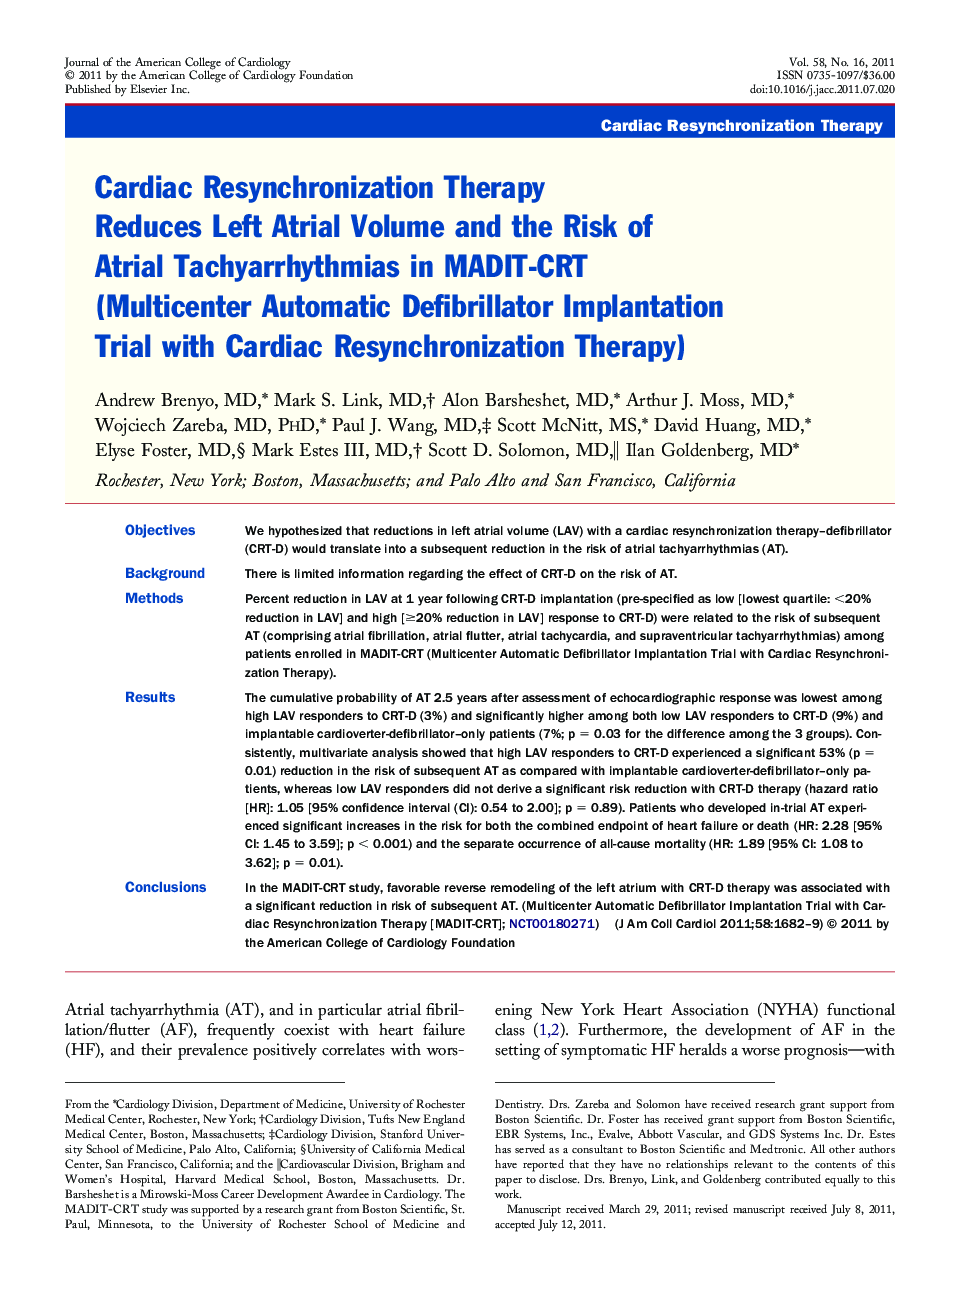 Cardiac Resynchronization Therapy Reduces Left Atrial Volume and the Risk of Atrial Tachyarrhythmias in MADIT-CRT (Multicenter Automatic Defibrillator Implantation Trial with Cardiac Resynchronization Therapy) 